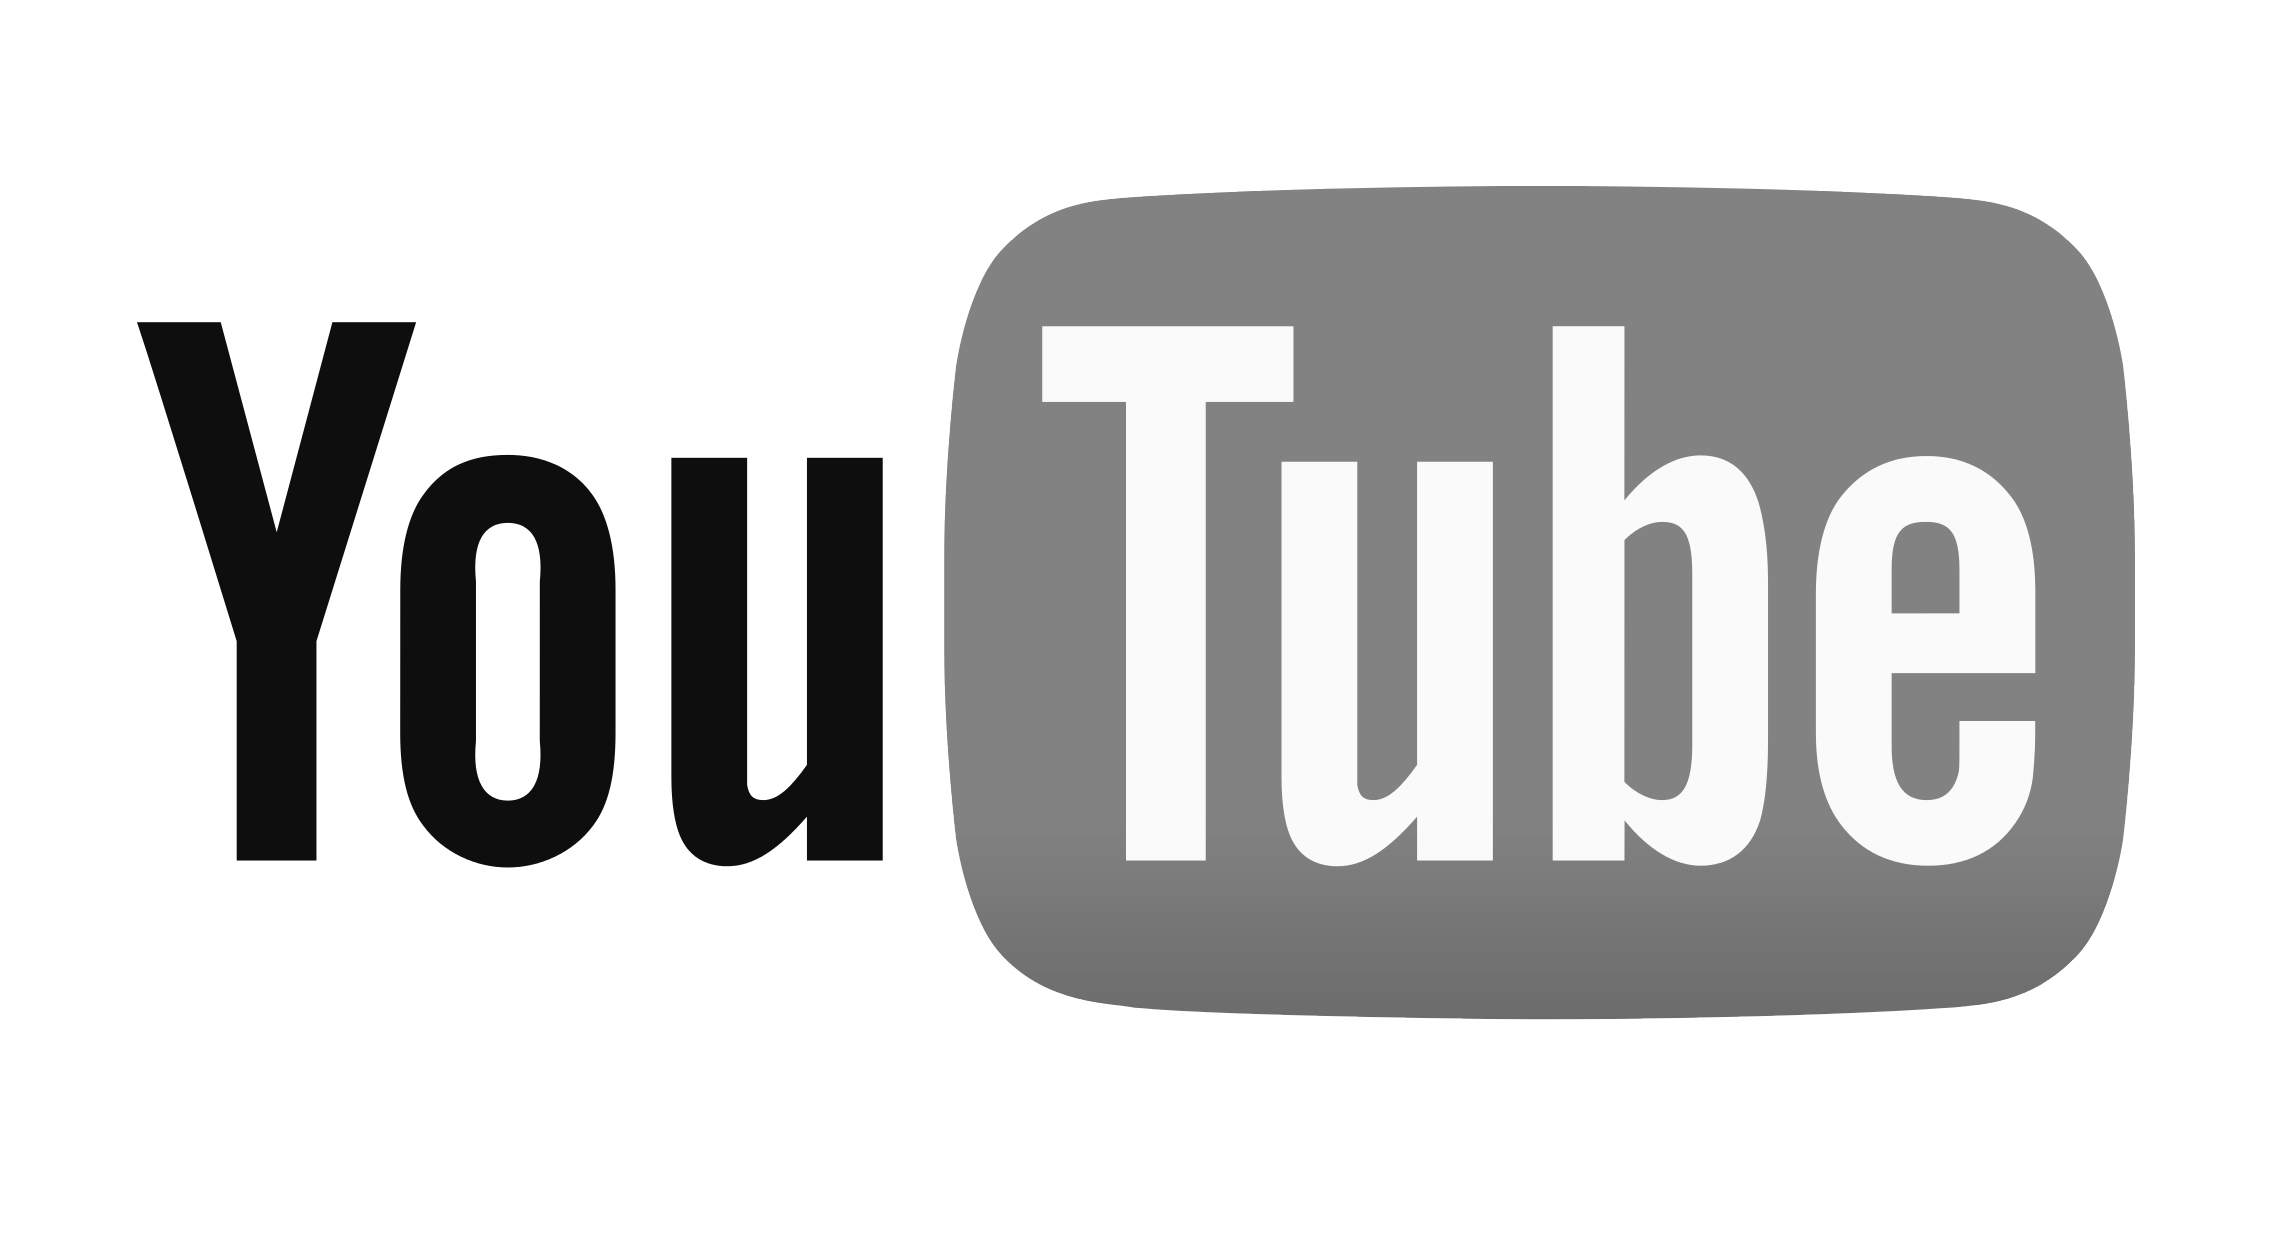 YouTube testing 'Explore' tab on iOS devices for broader recommen...